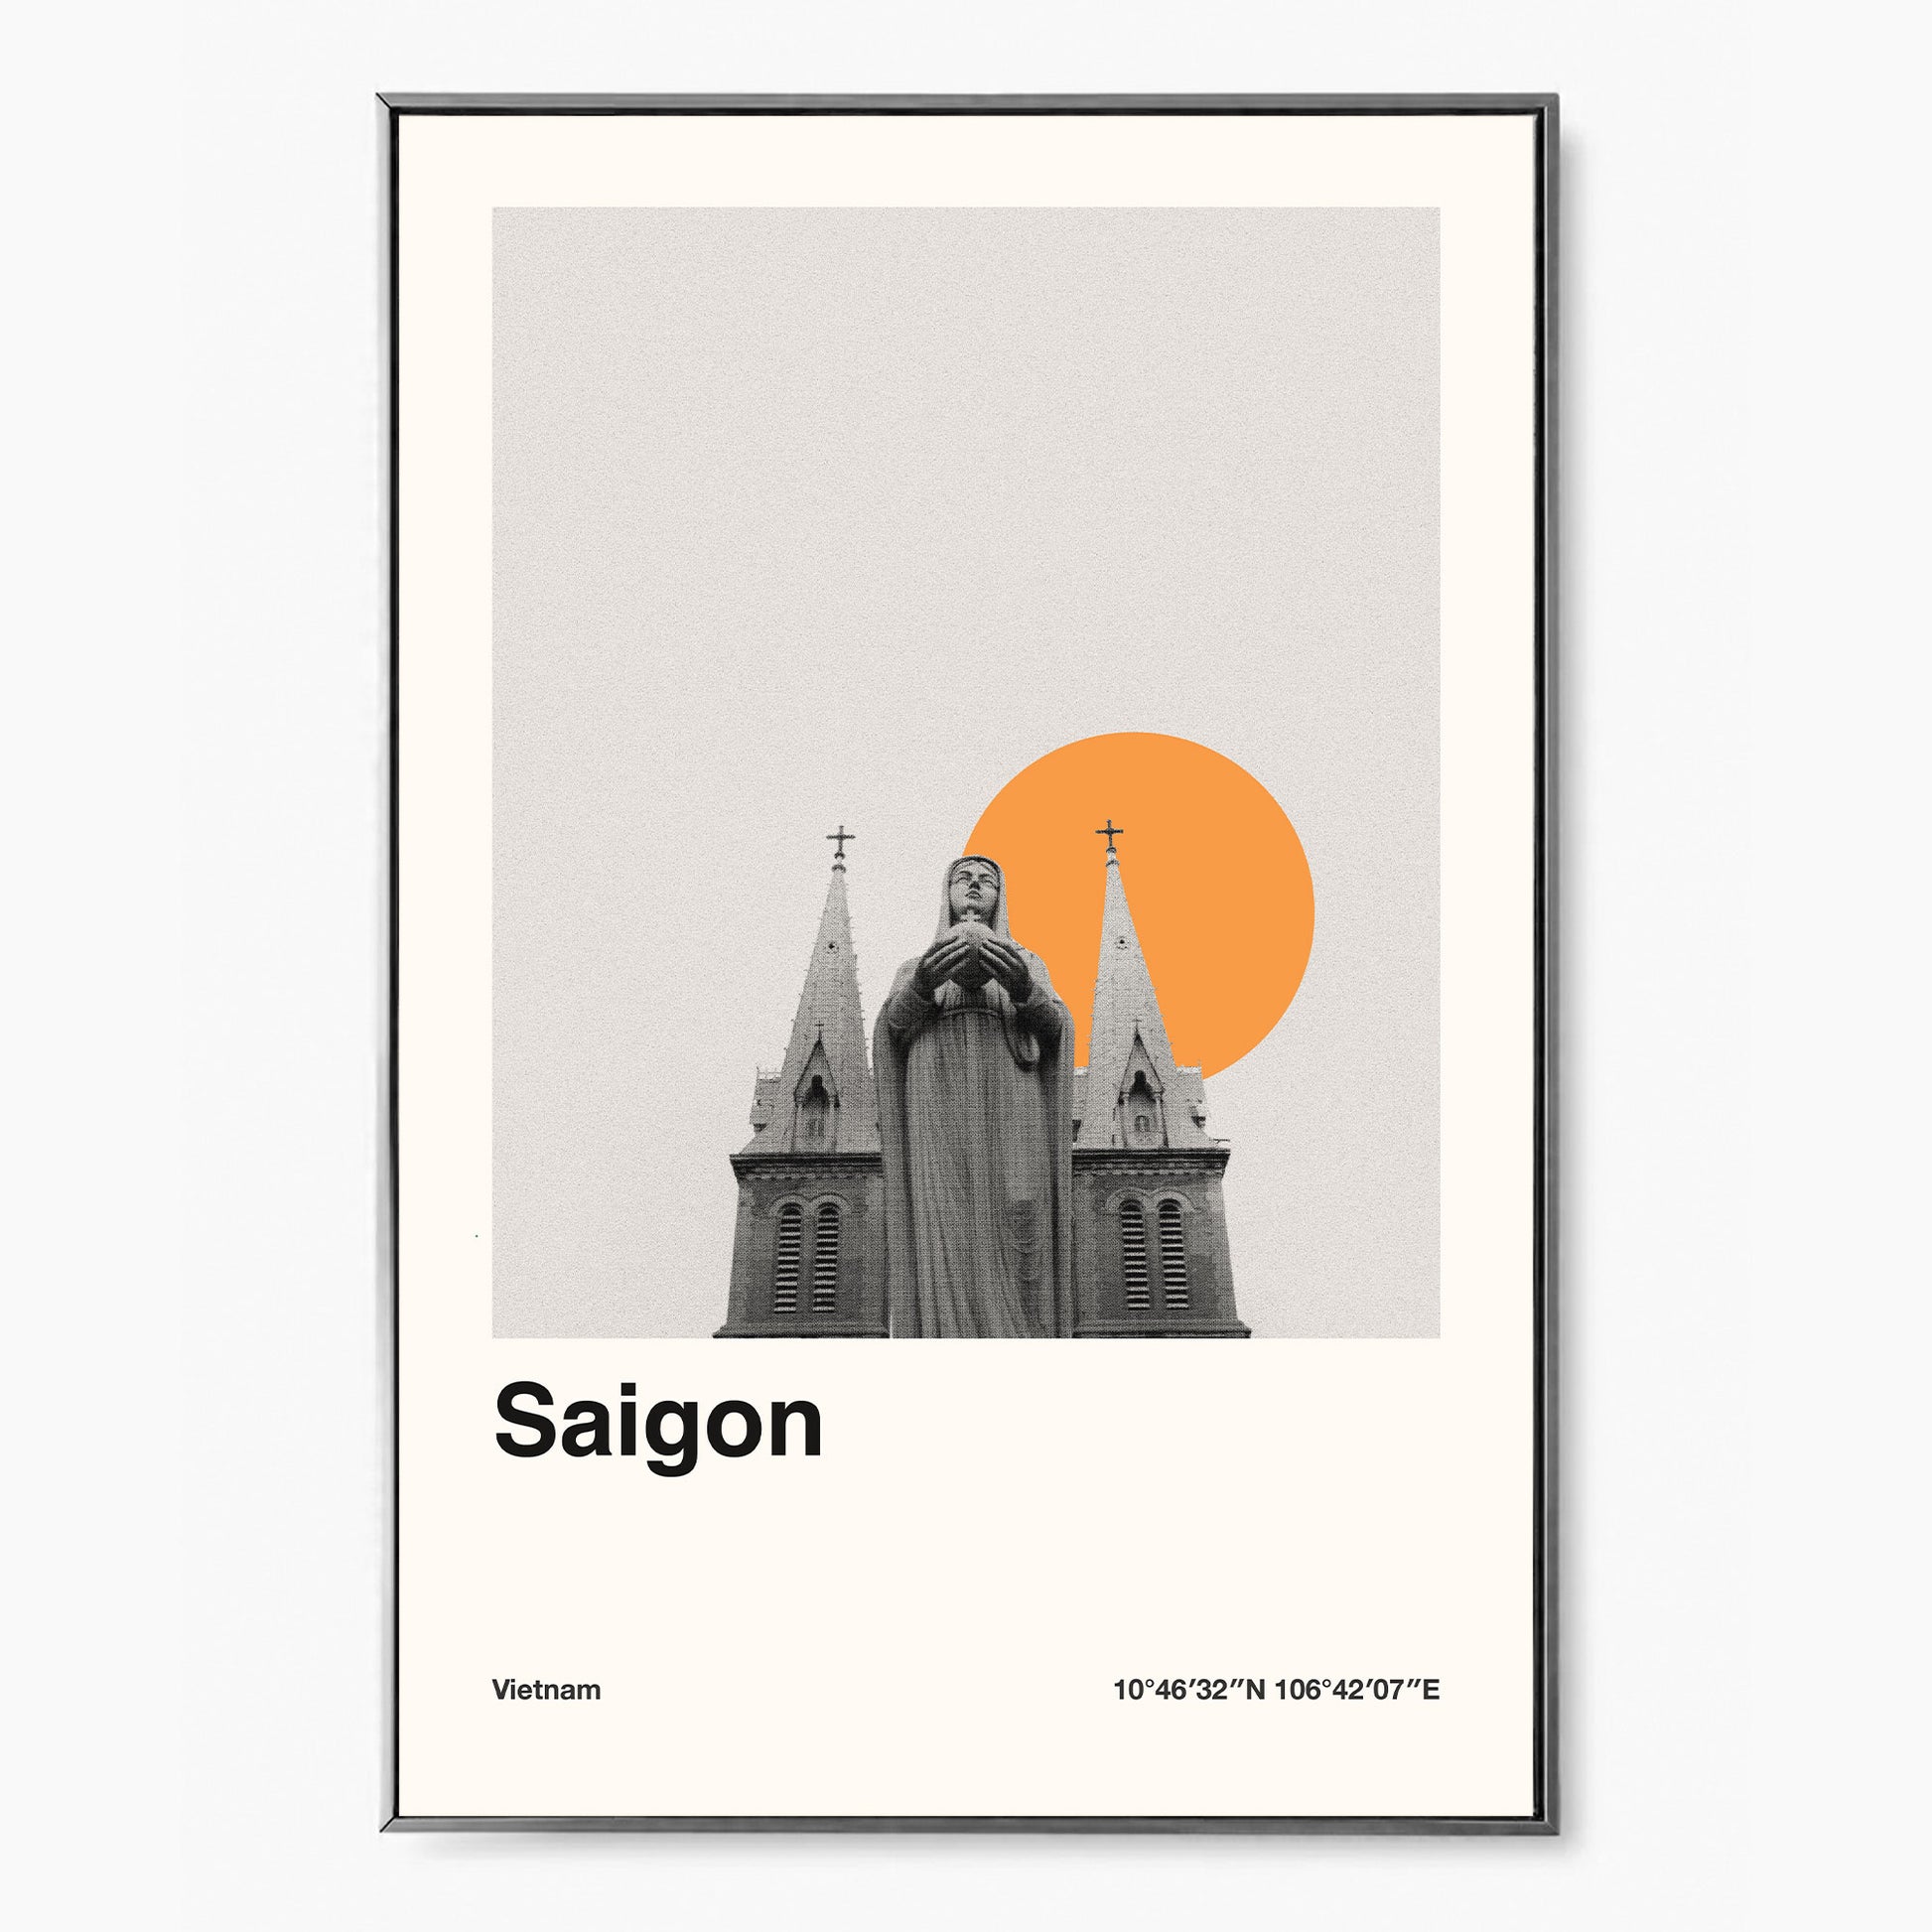 Saigon travel print art poster featuring the notre dame cathedral